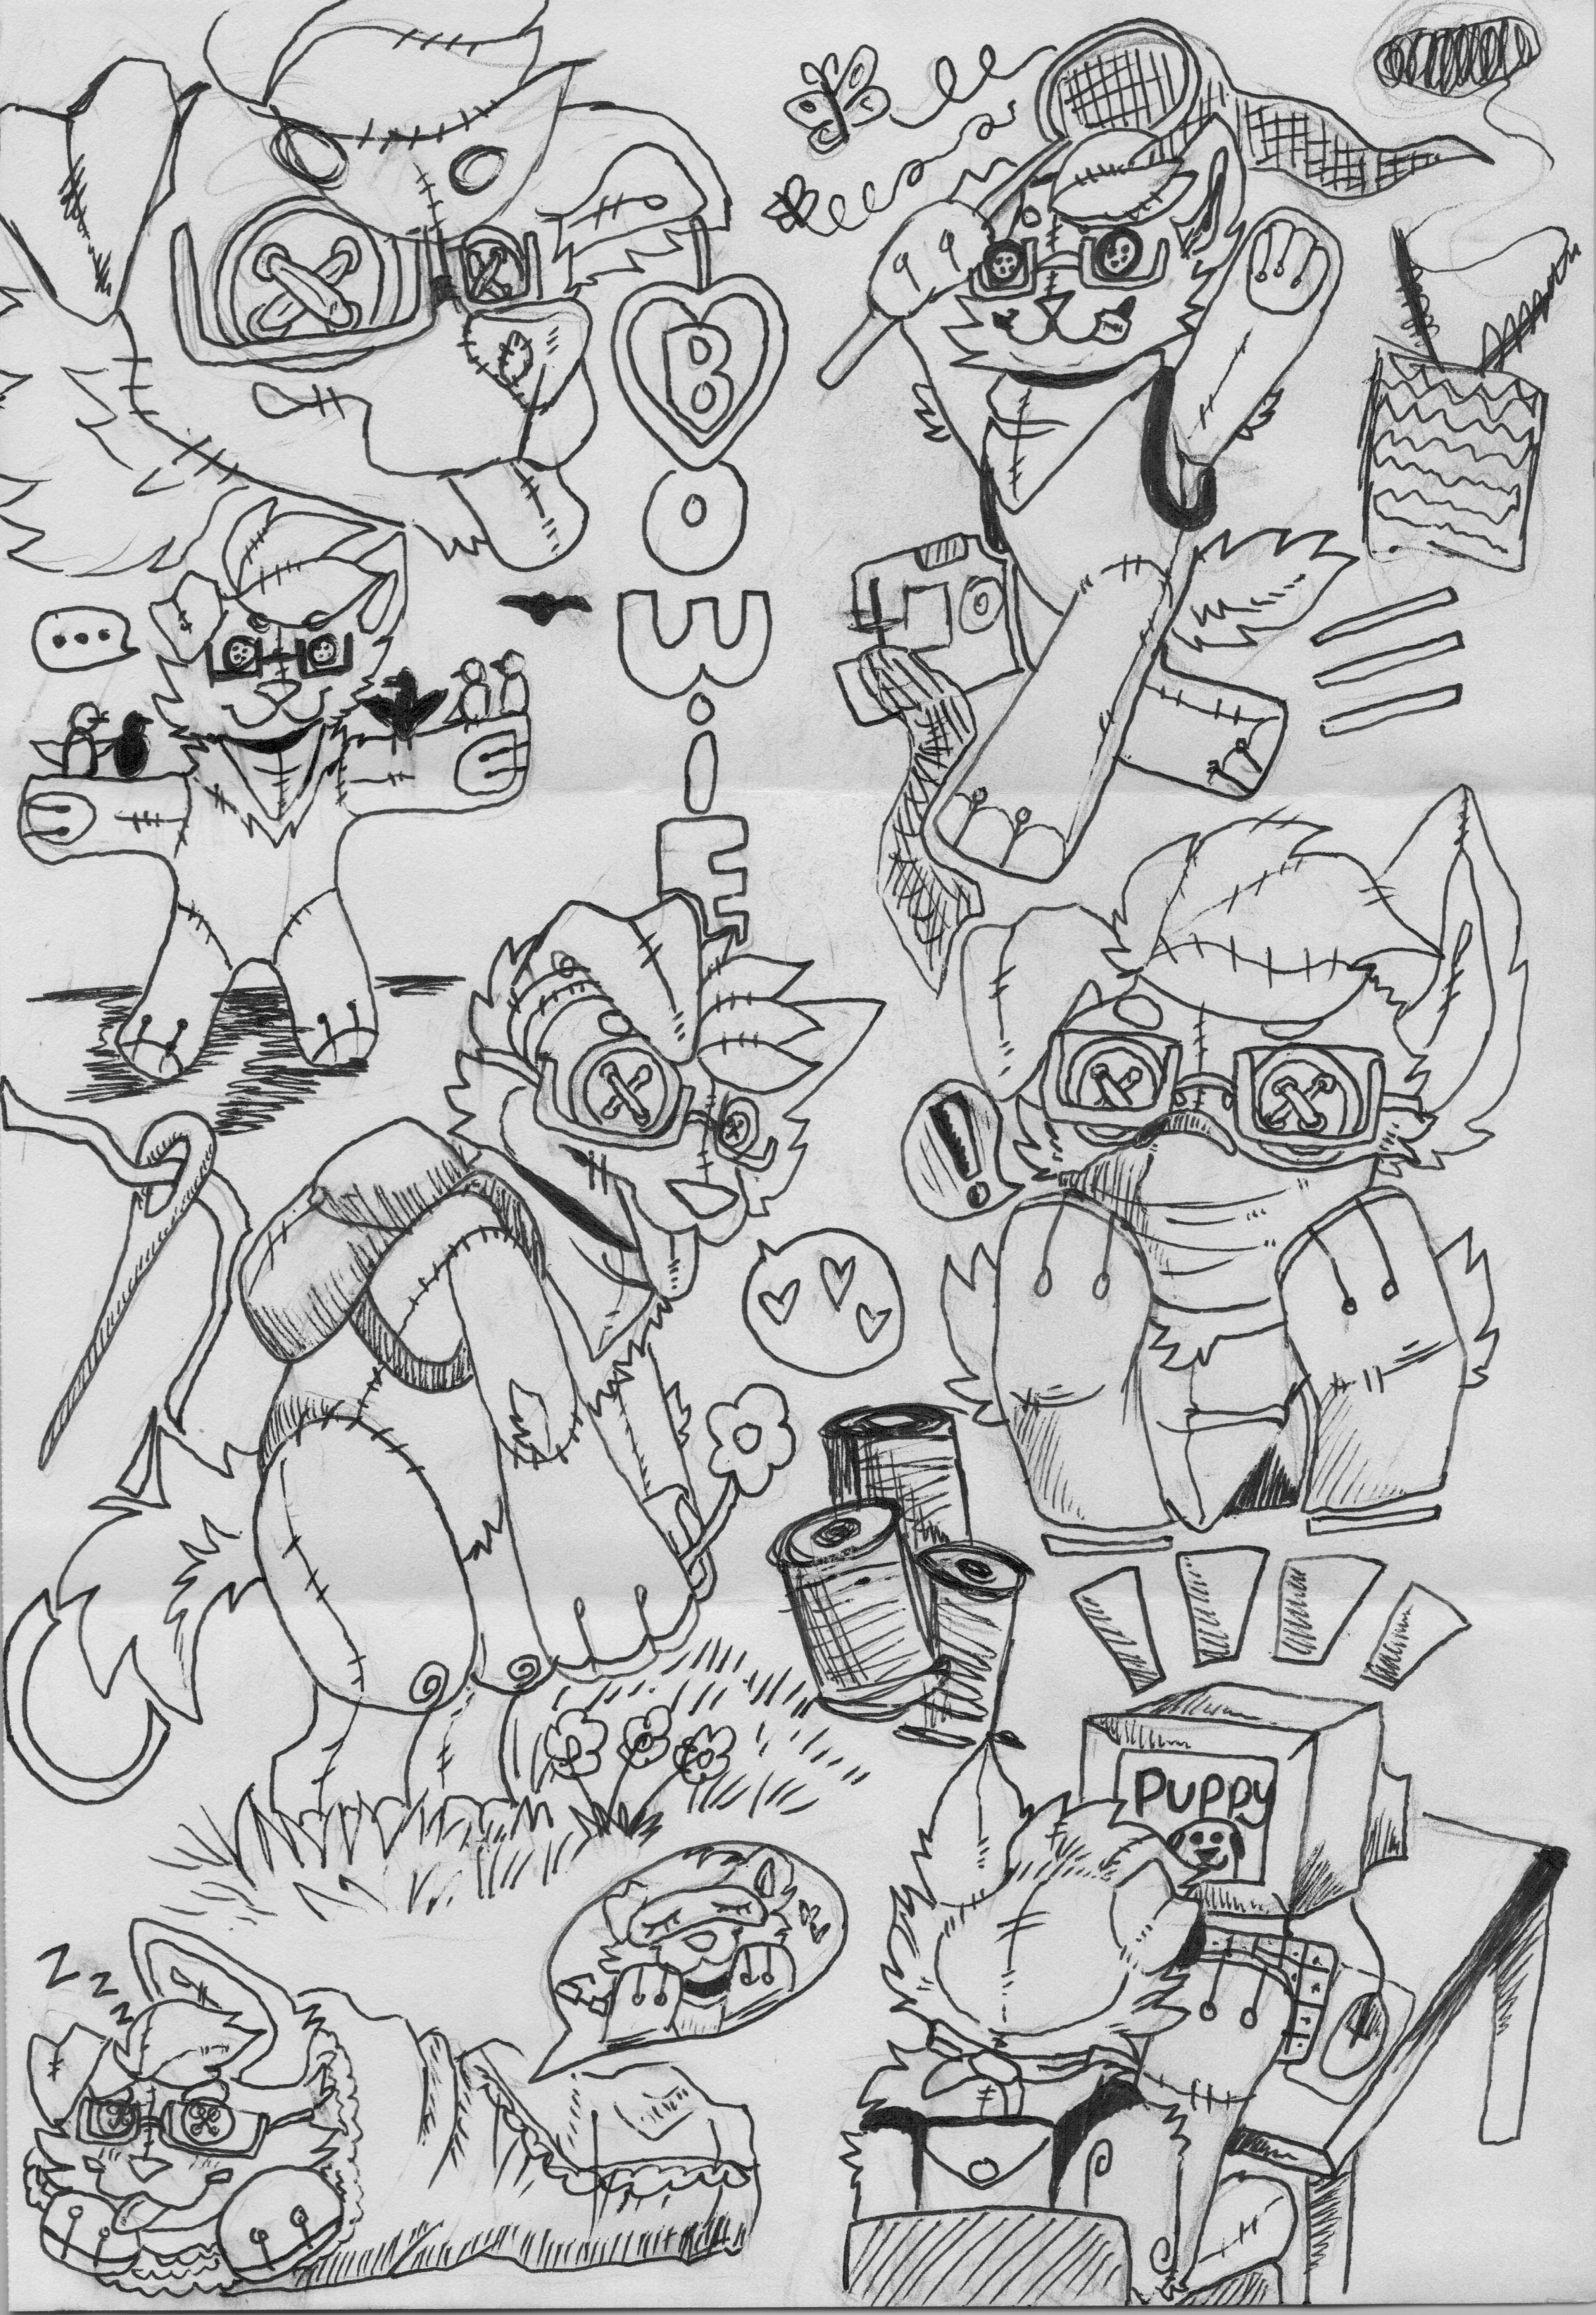 various sketches of a plush Bowie chasing buutterflies with a net, as a scarecrow, picking flowers, in a sleeping bag, on a computer, and more